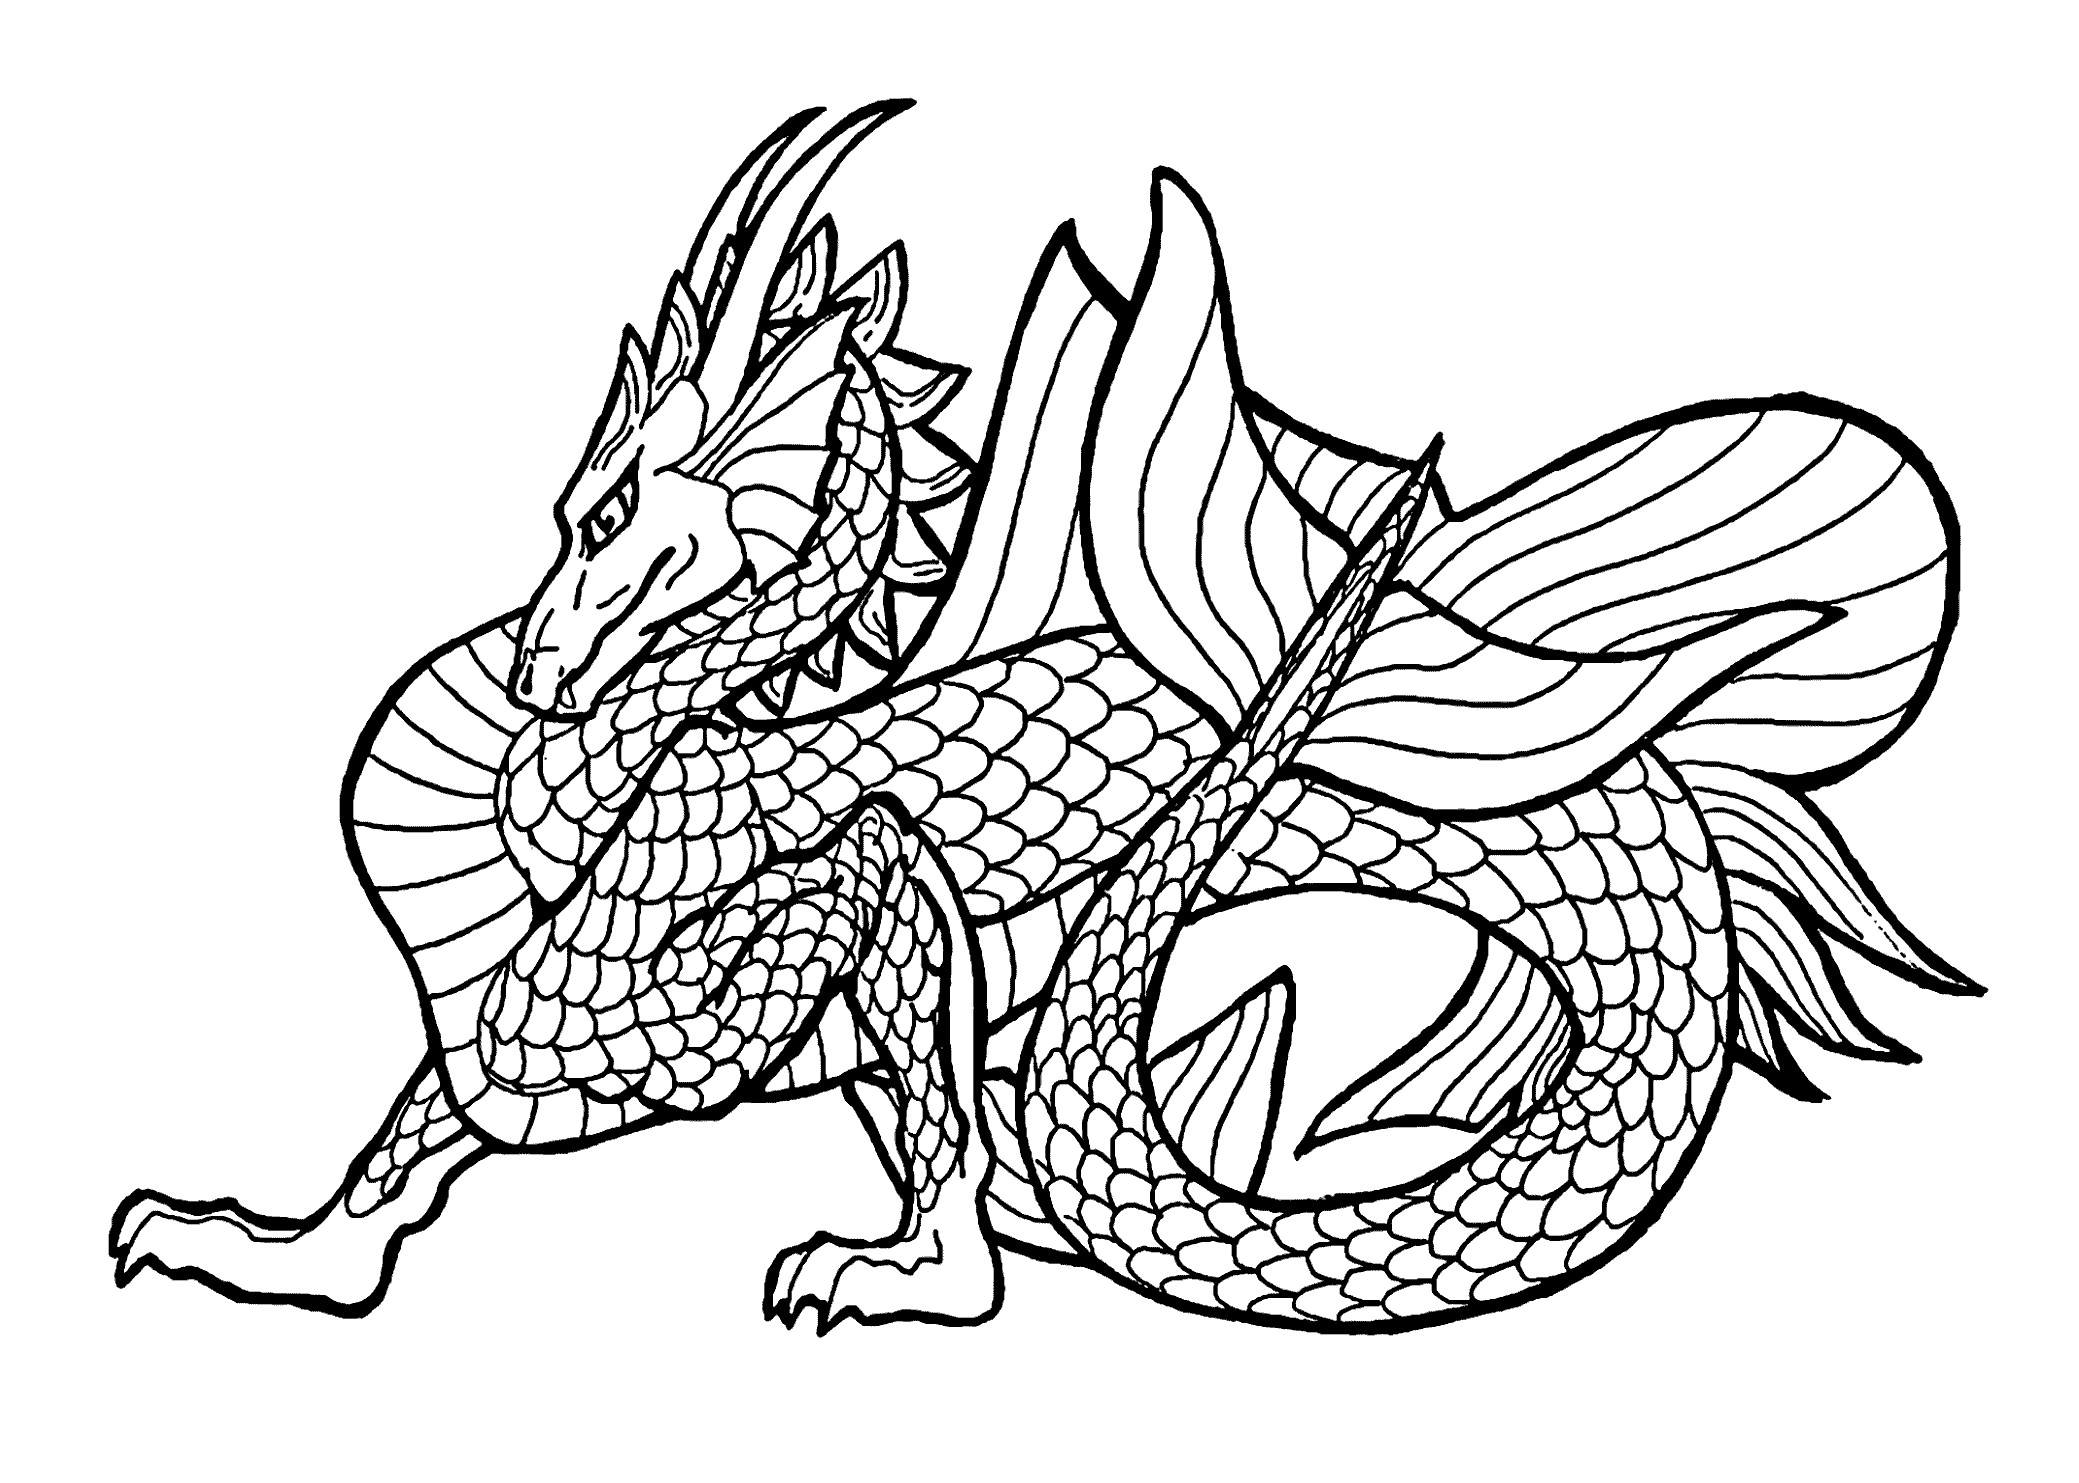 Realistic Dragon Coloring Pages - Bubakids.com